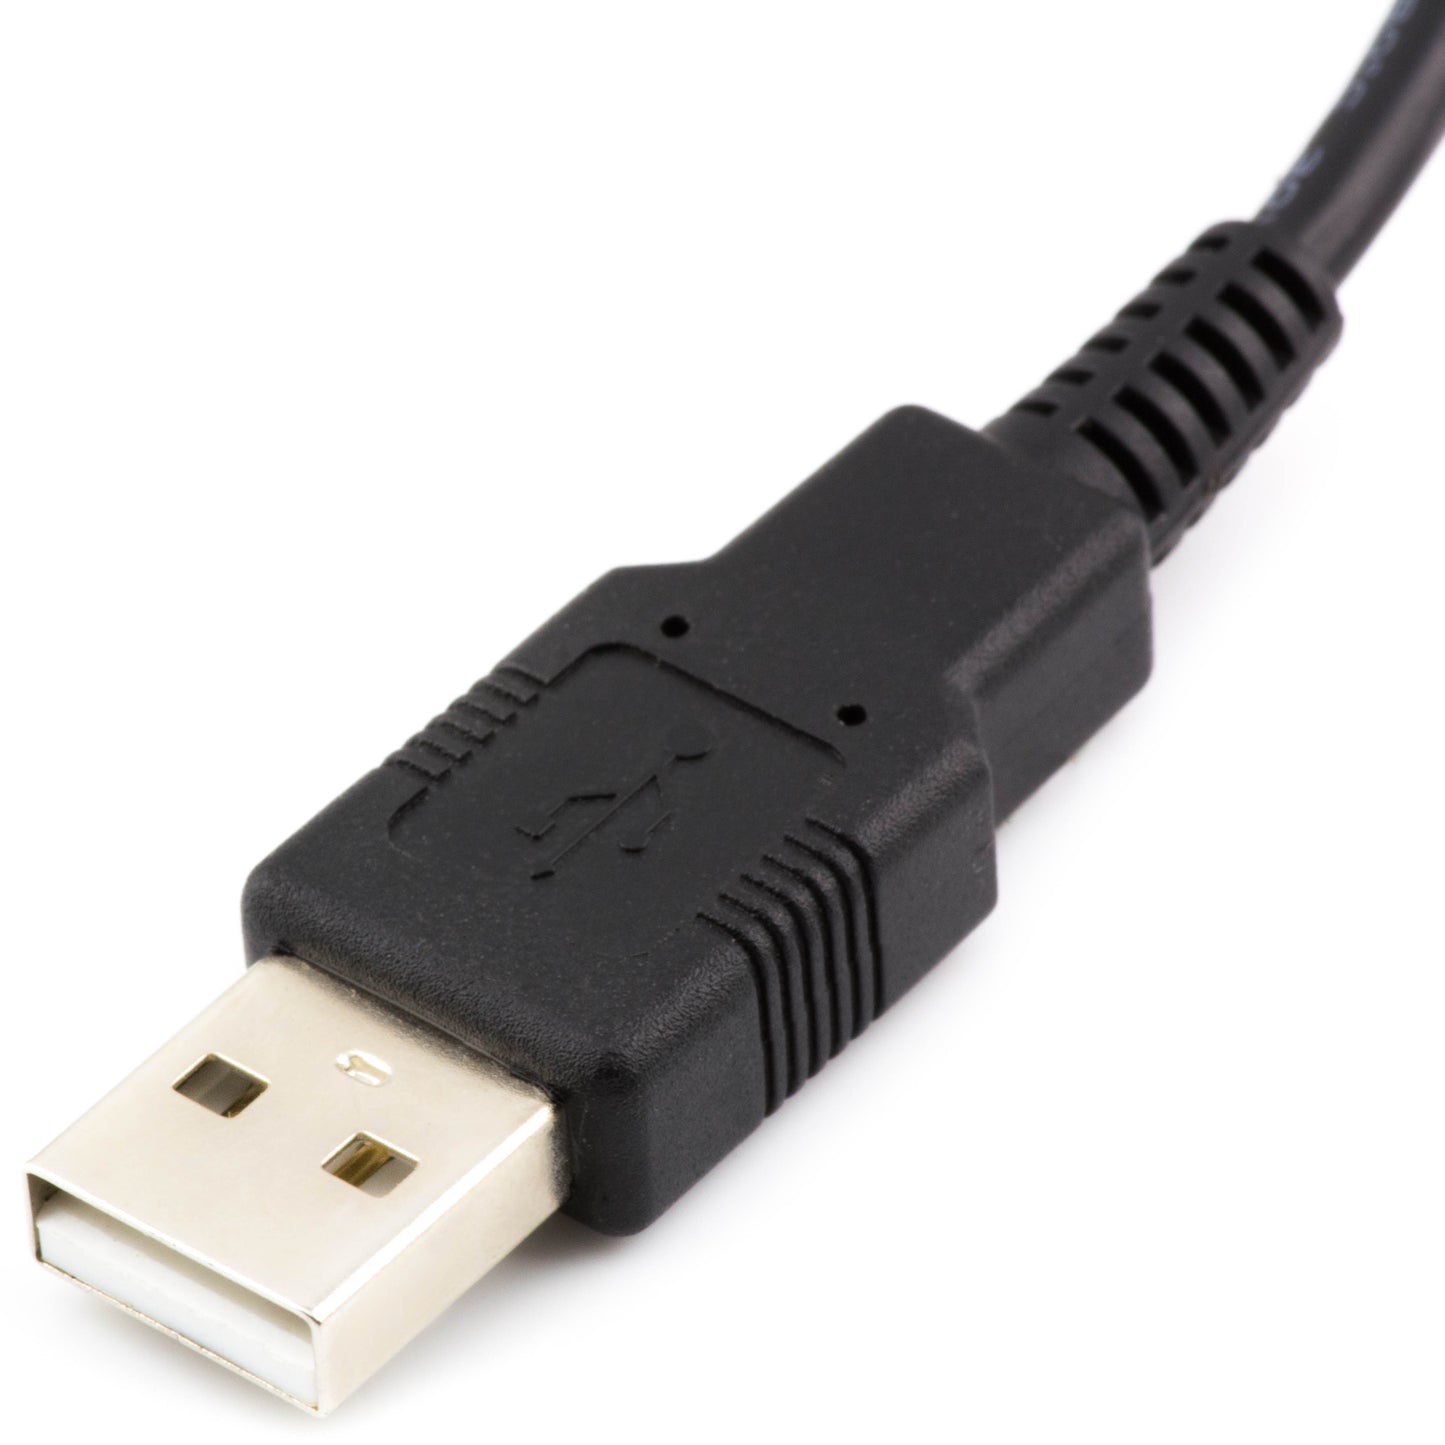 9-Pin USB IDC Dupont Male Header to Dual USB 2.0 Type A Male Cable